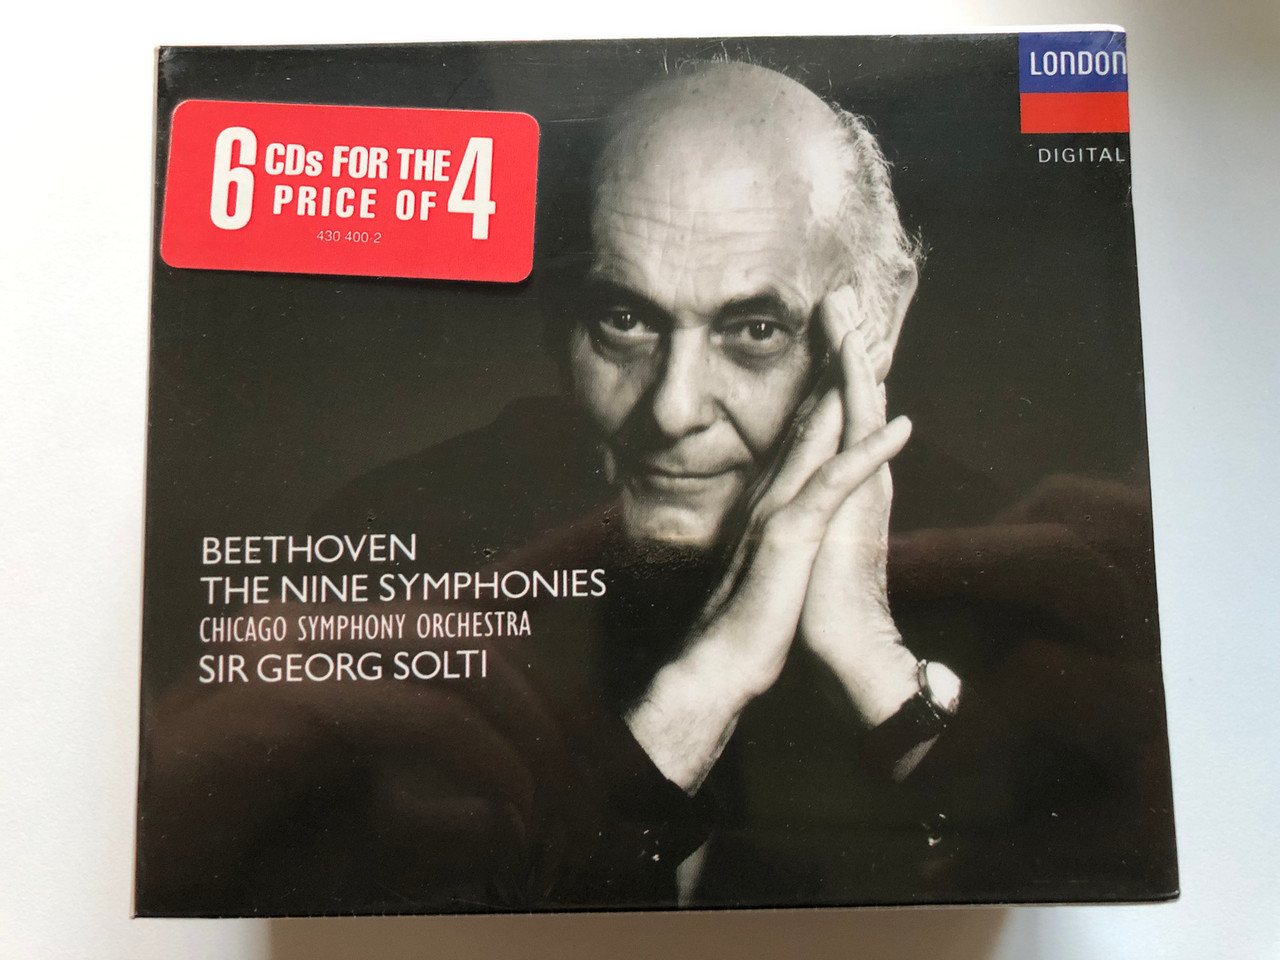 Bible　CD　My　Orchestra,　430　in　Records　Solti　Beethoven　The　Chicago　Audio　400-2　London　Symphony　Nine　Georg　1990　6x　Language　Symphonies　Sir